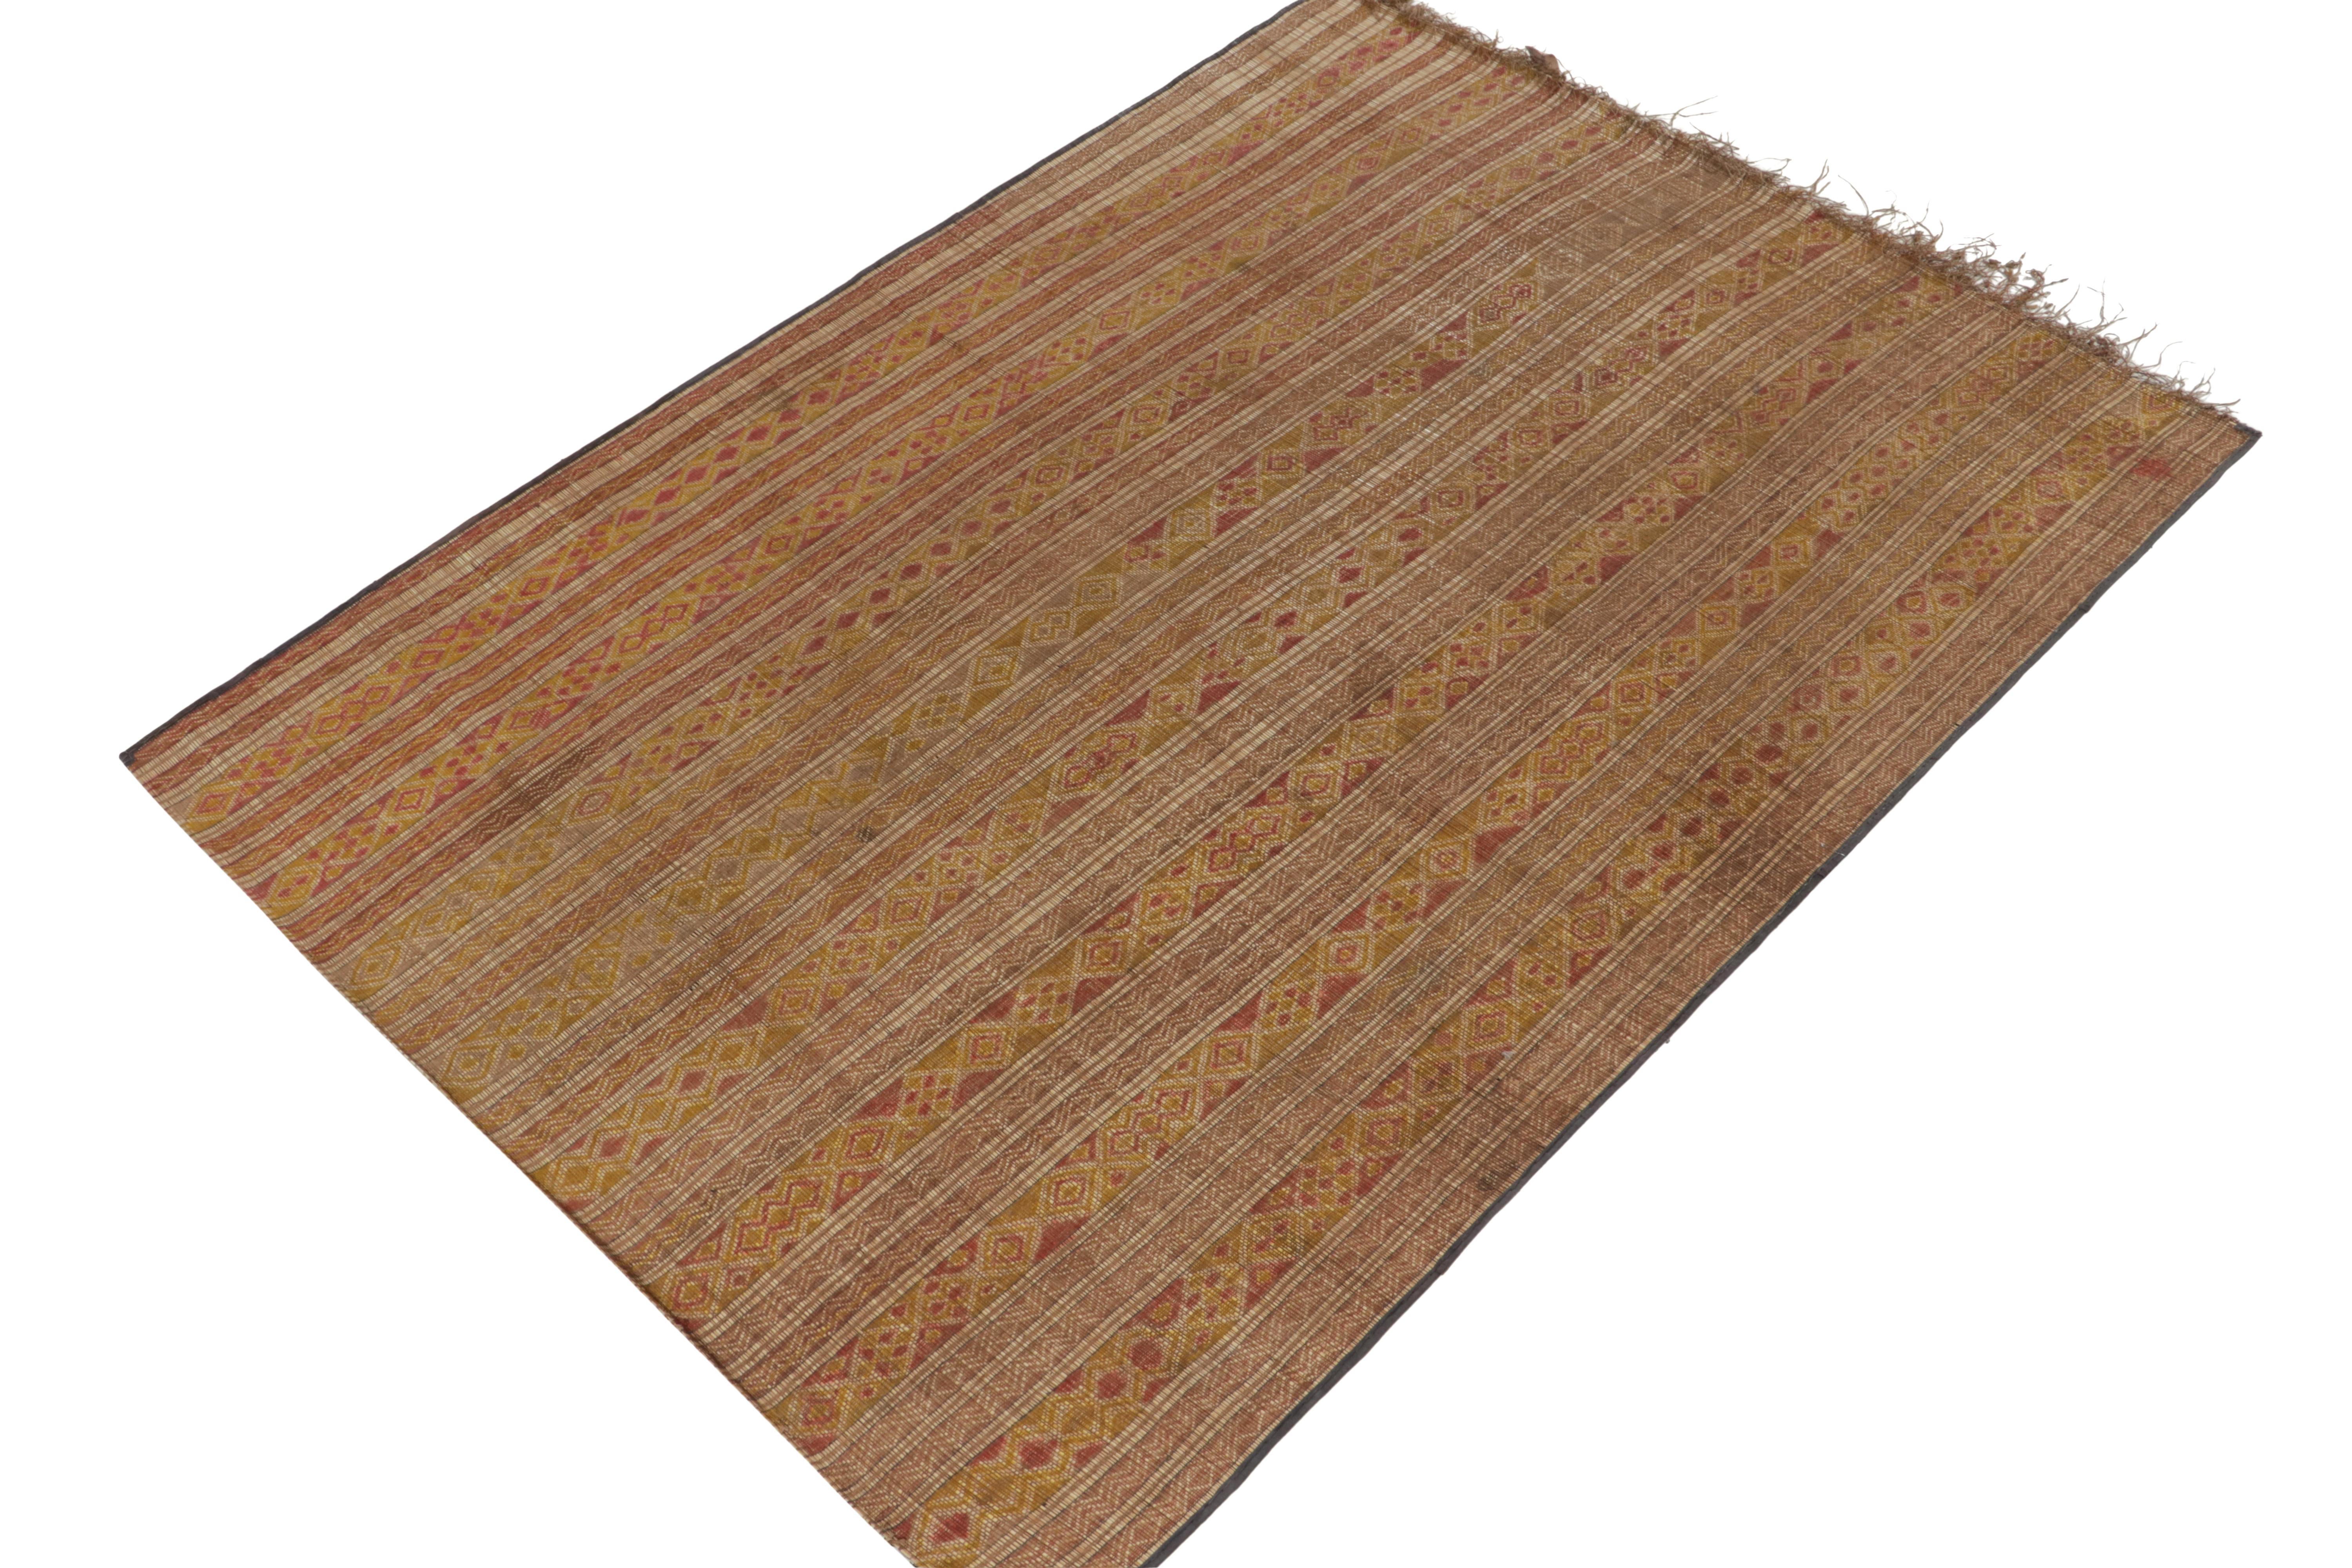 Handwoven in reed per the traditional style, a vintage Moroccan floor piece from the 1950s joining our coveted vintage selections. 

This 7x9 collectible is traditionally called a Tuareg mat and enjoys a special weaving technique among those of